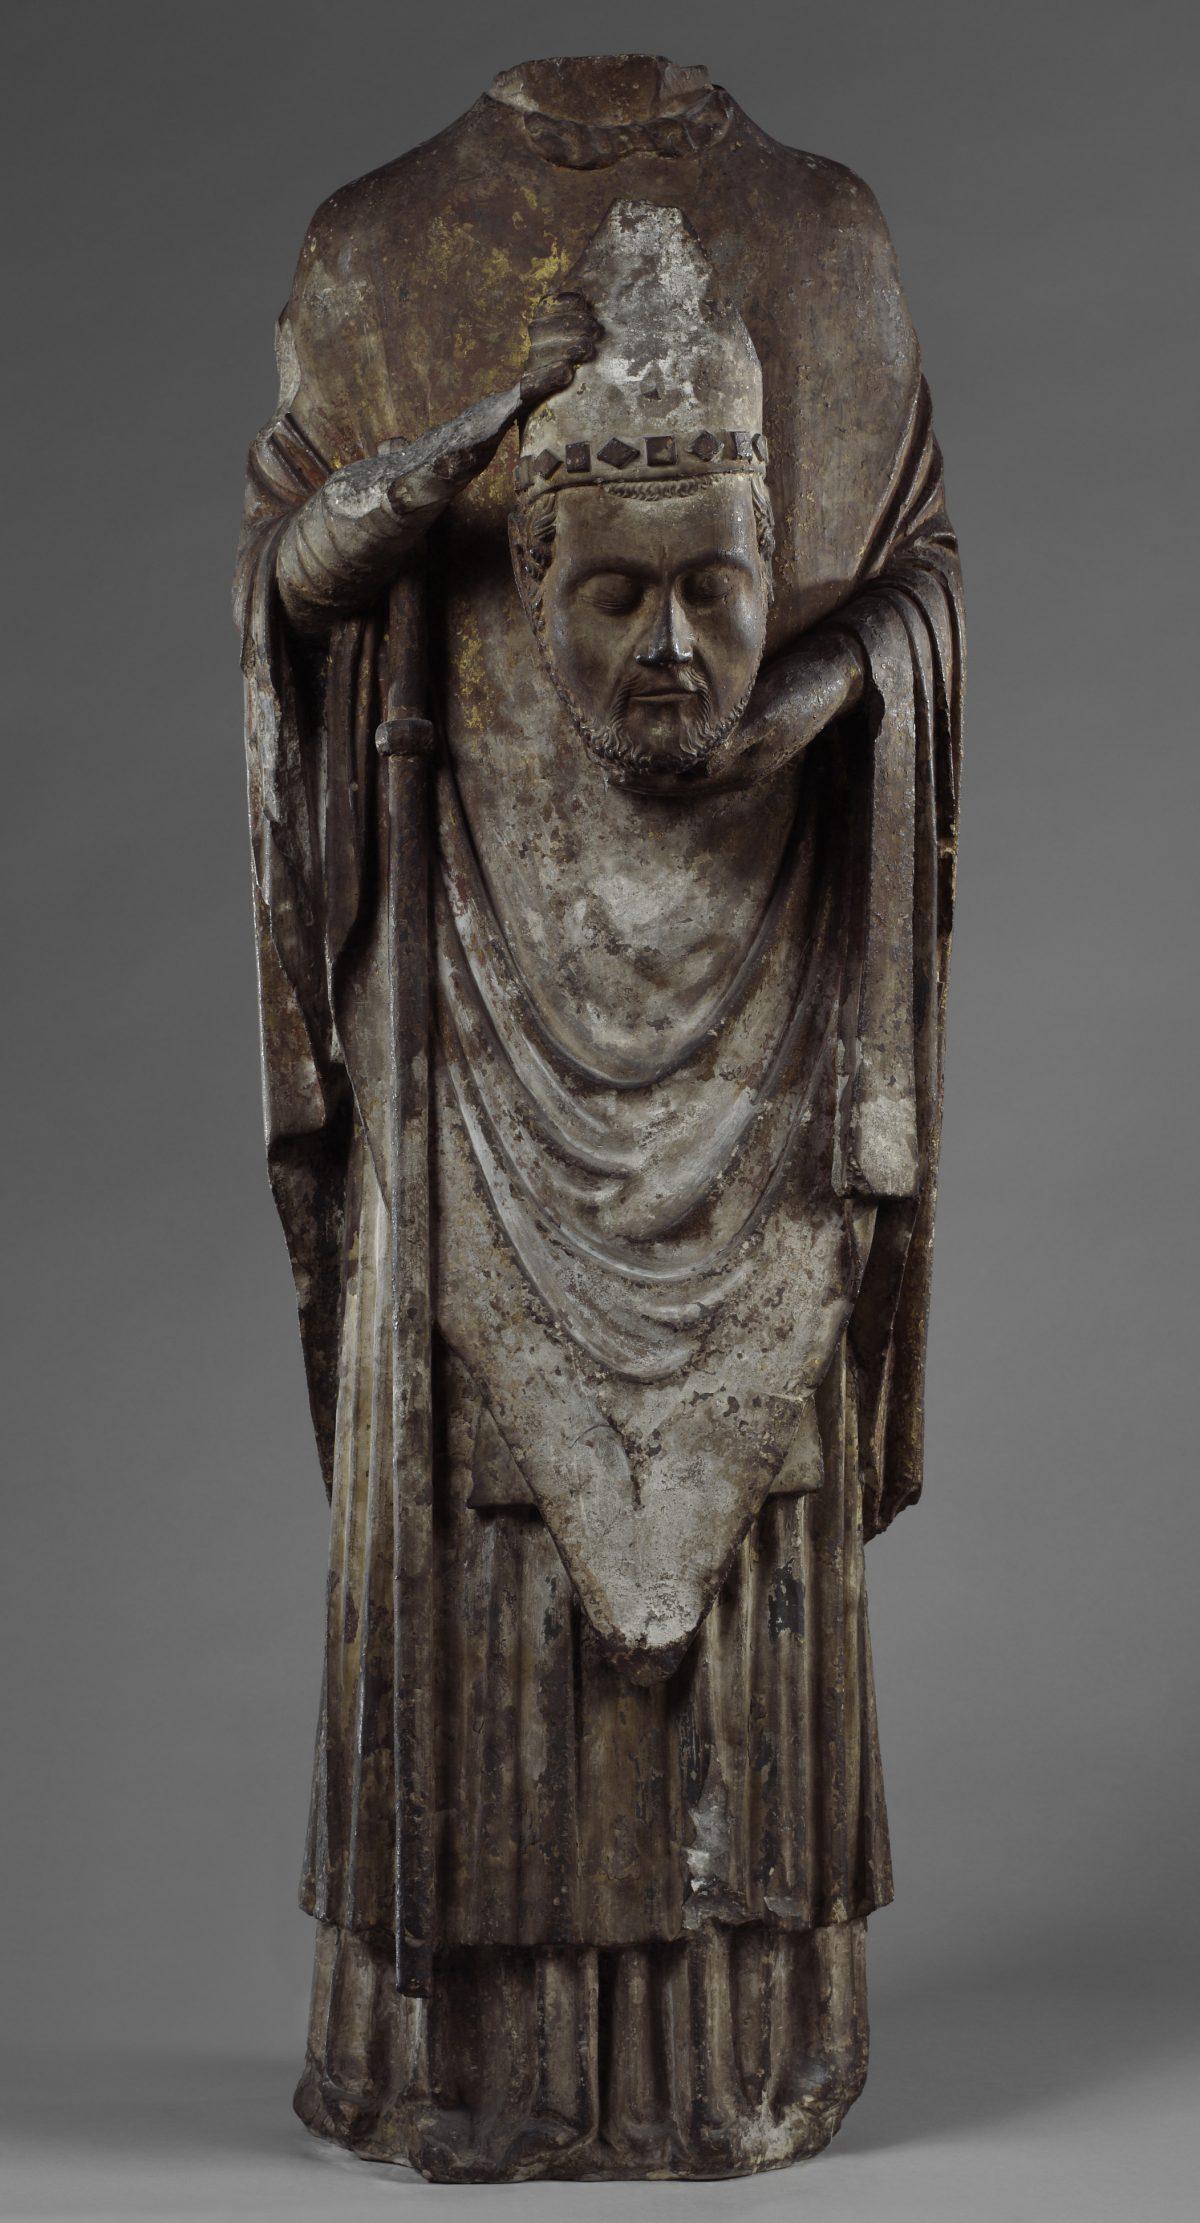 “St. Firmin Holding His Head,” Amiens, France, circa 1225-75. Limestone and pigment. The Metropolitan Museum of Art. (The Metropolitan Museum of Art/Art Resource, NY)